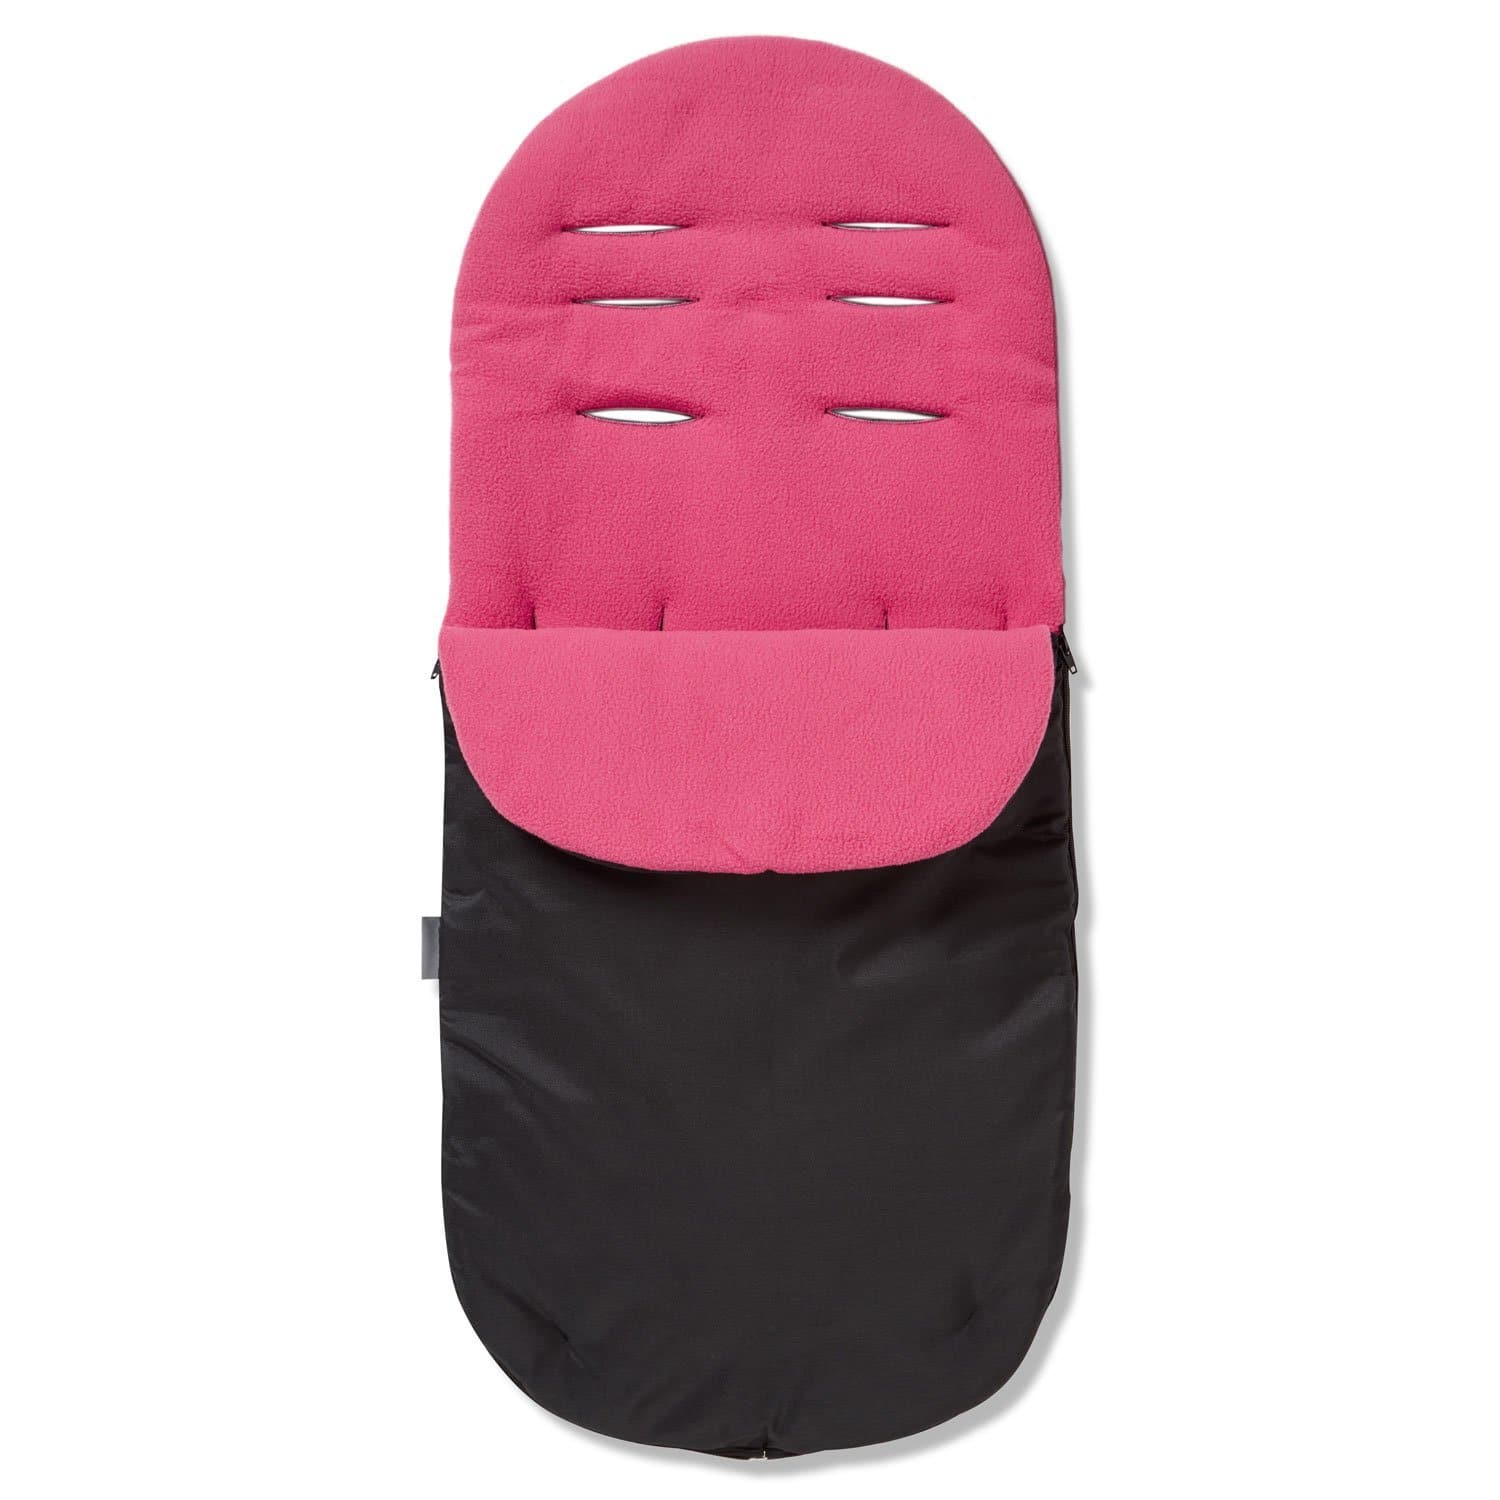 Footmuff / Cosy Toes Compatible with Orbit - For Your Little One